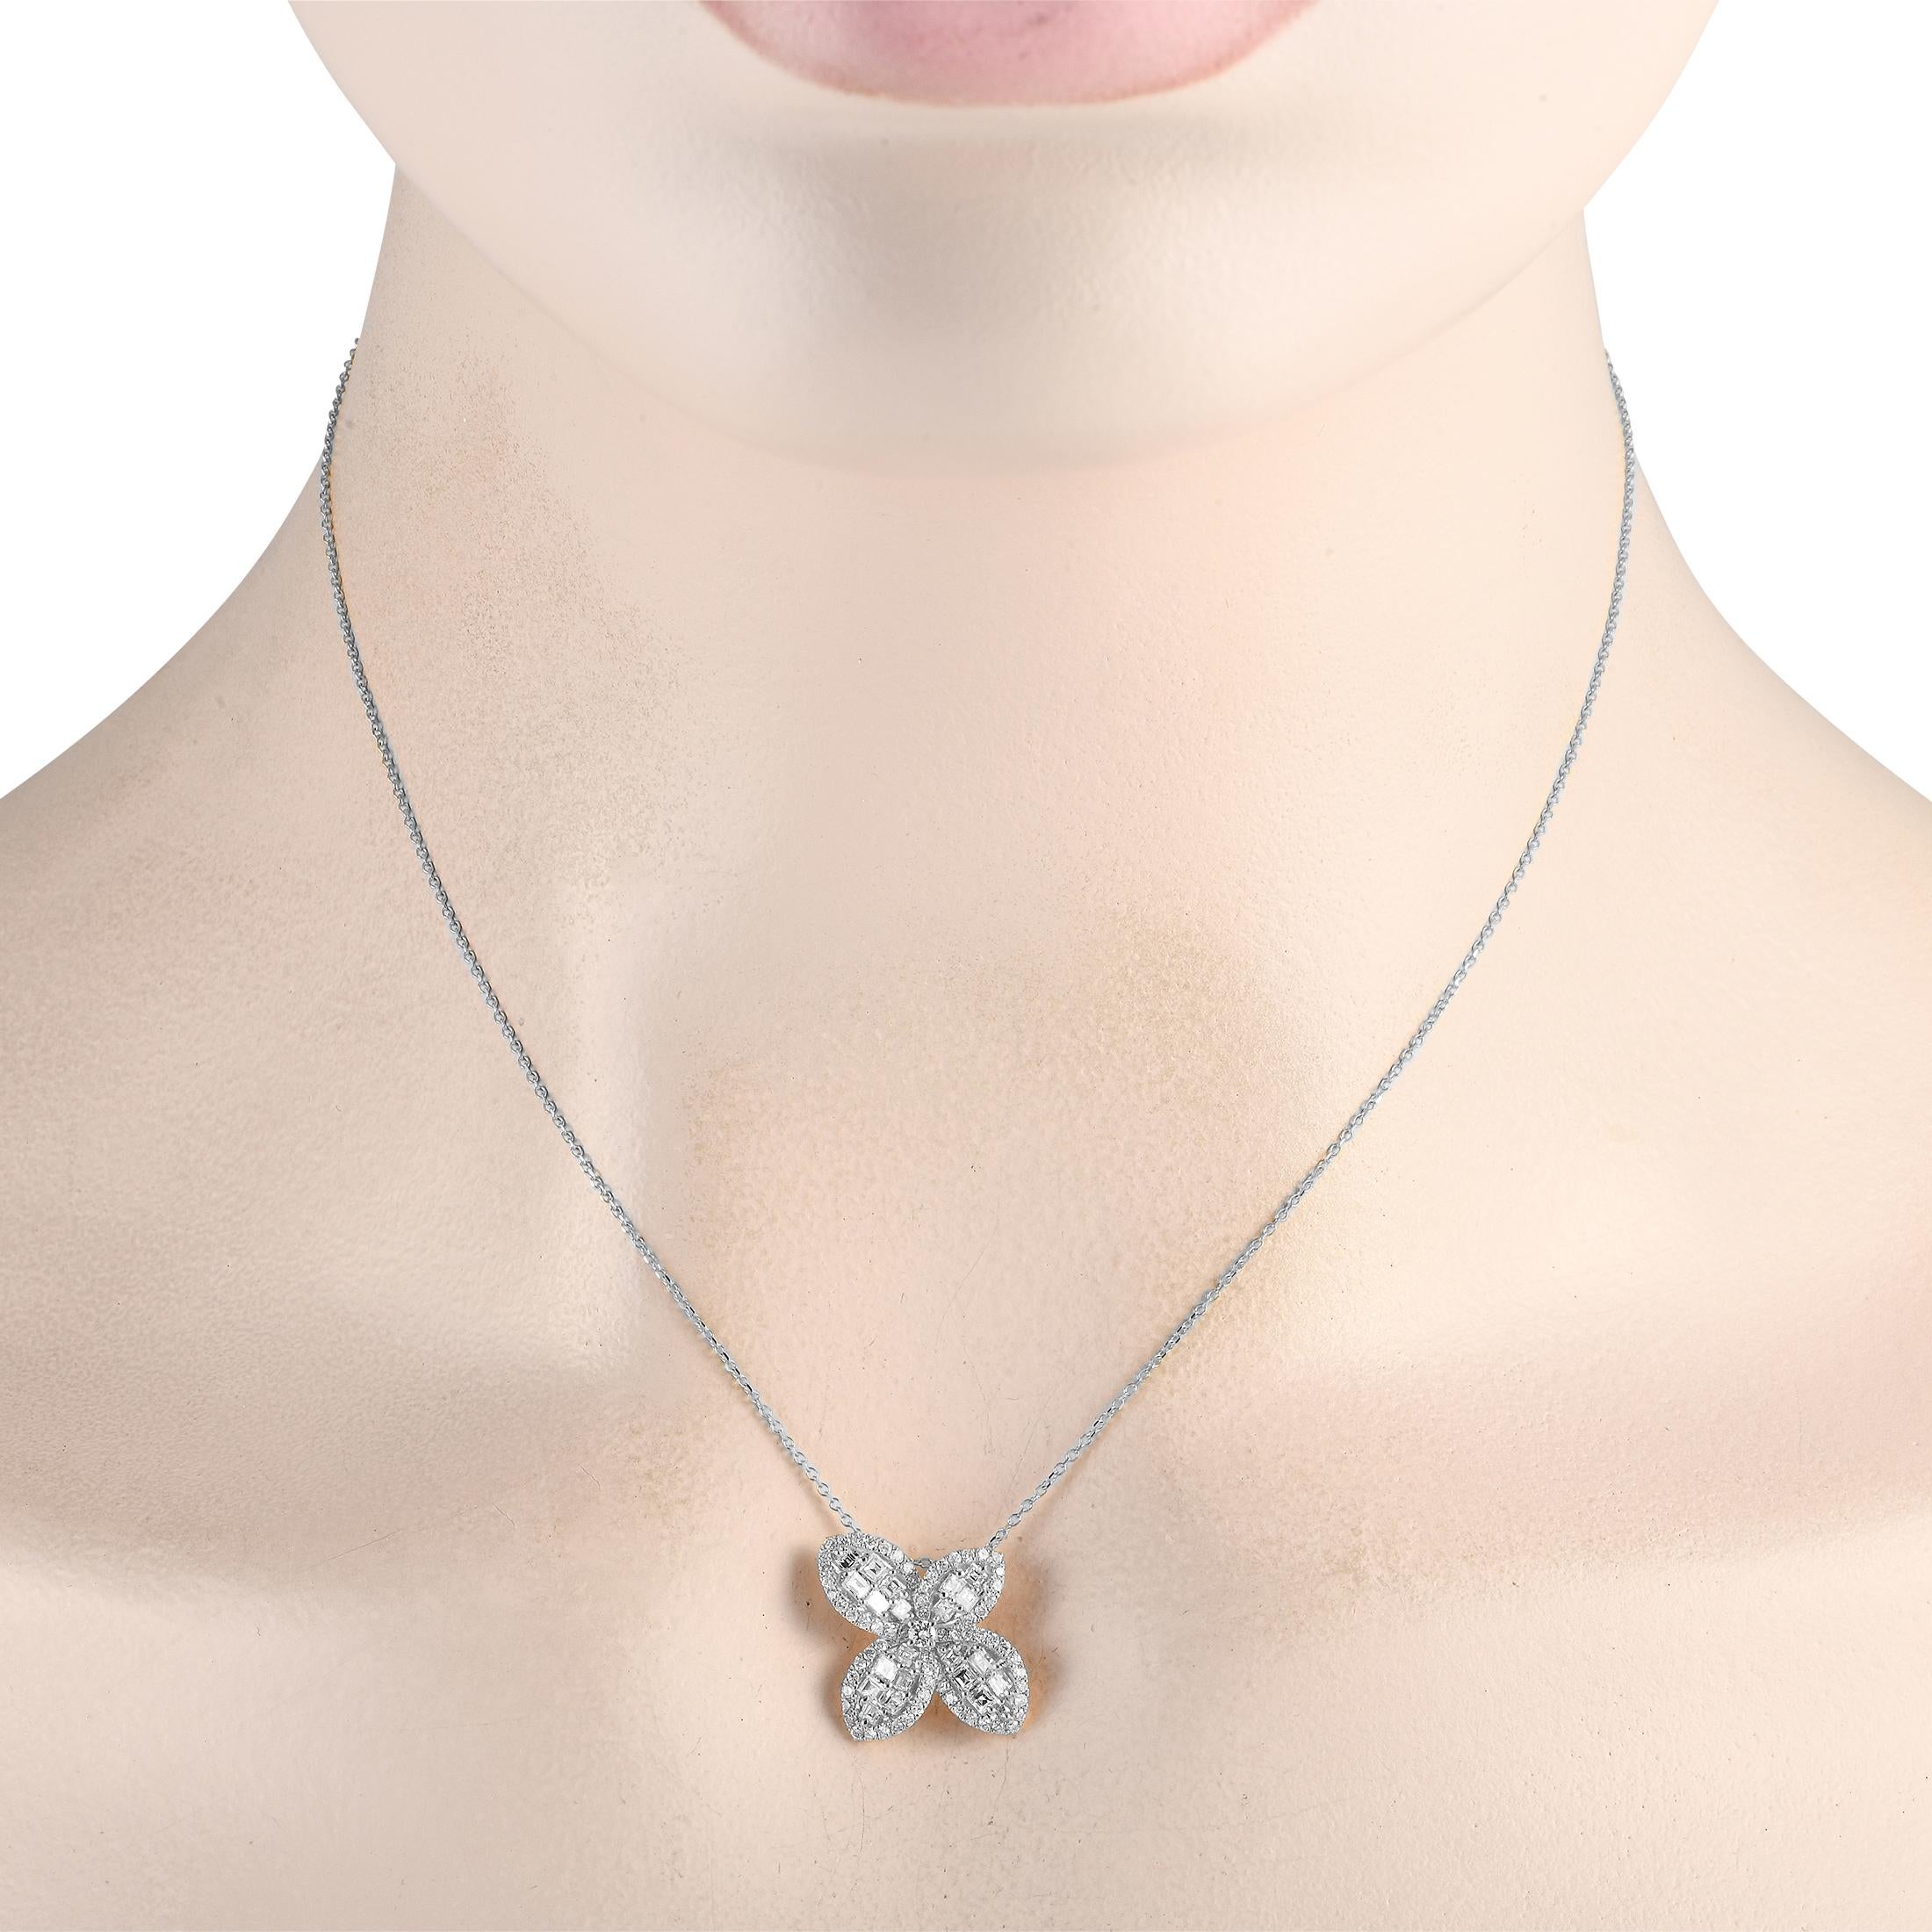 A breathtaking butterfly shaped pendant measuring 0.65 round makes this 18K white gold necklace simply unforgettable. This entire accessory is elevated by asscher-cut diamonds totaling 0.70 carats and additional diamond accents totaling 0.40